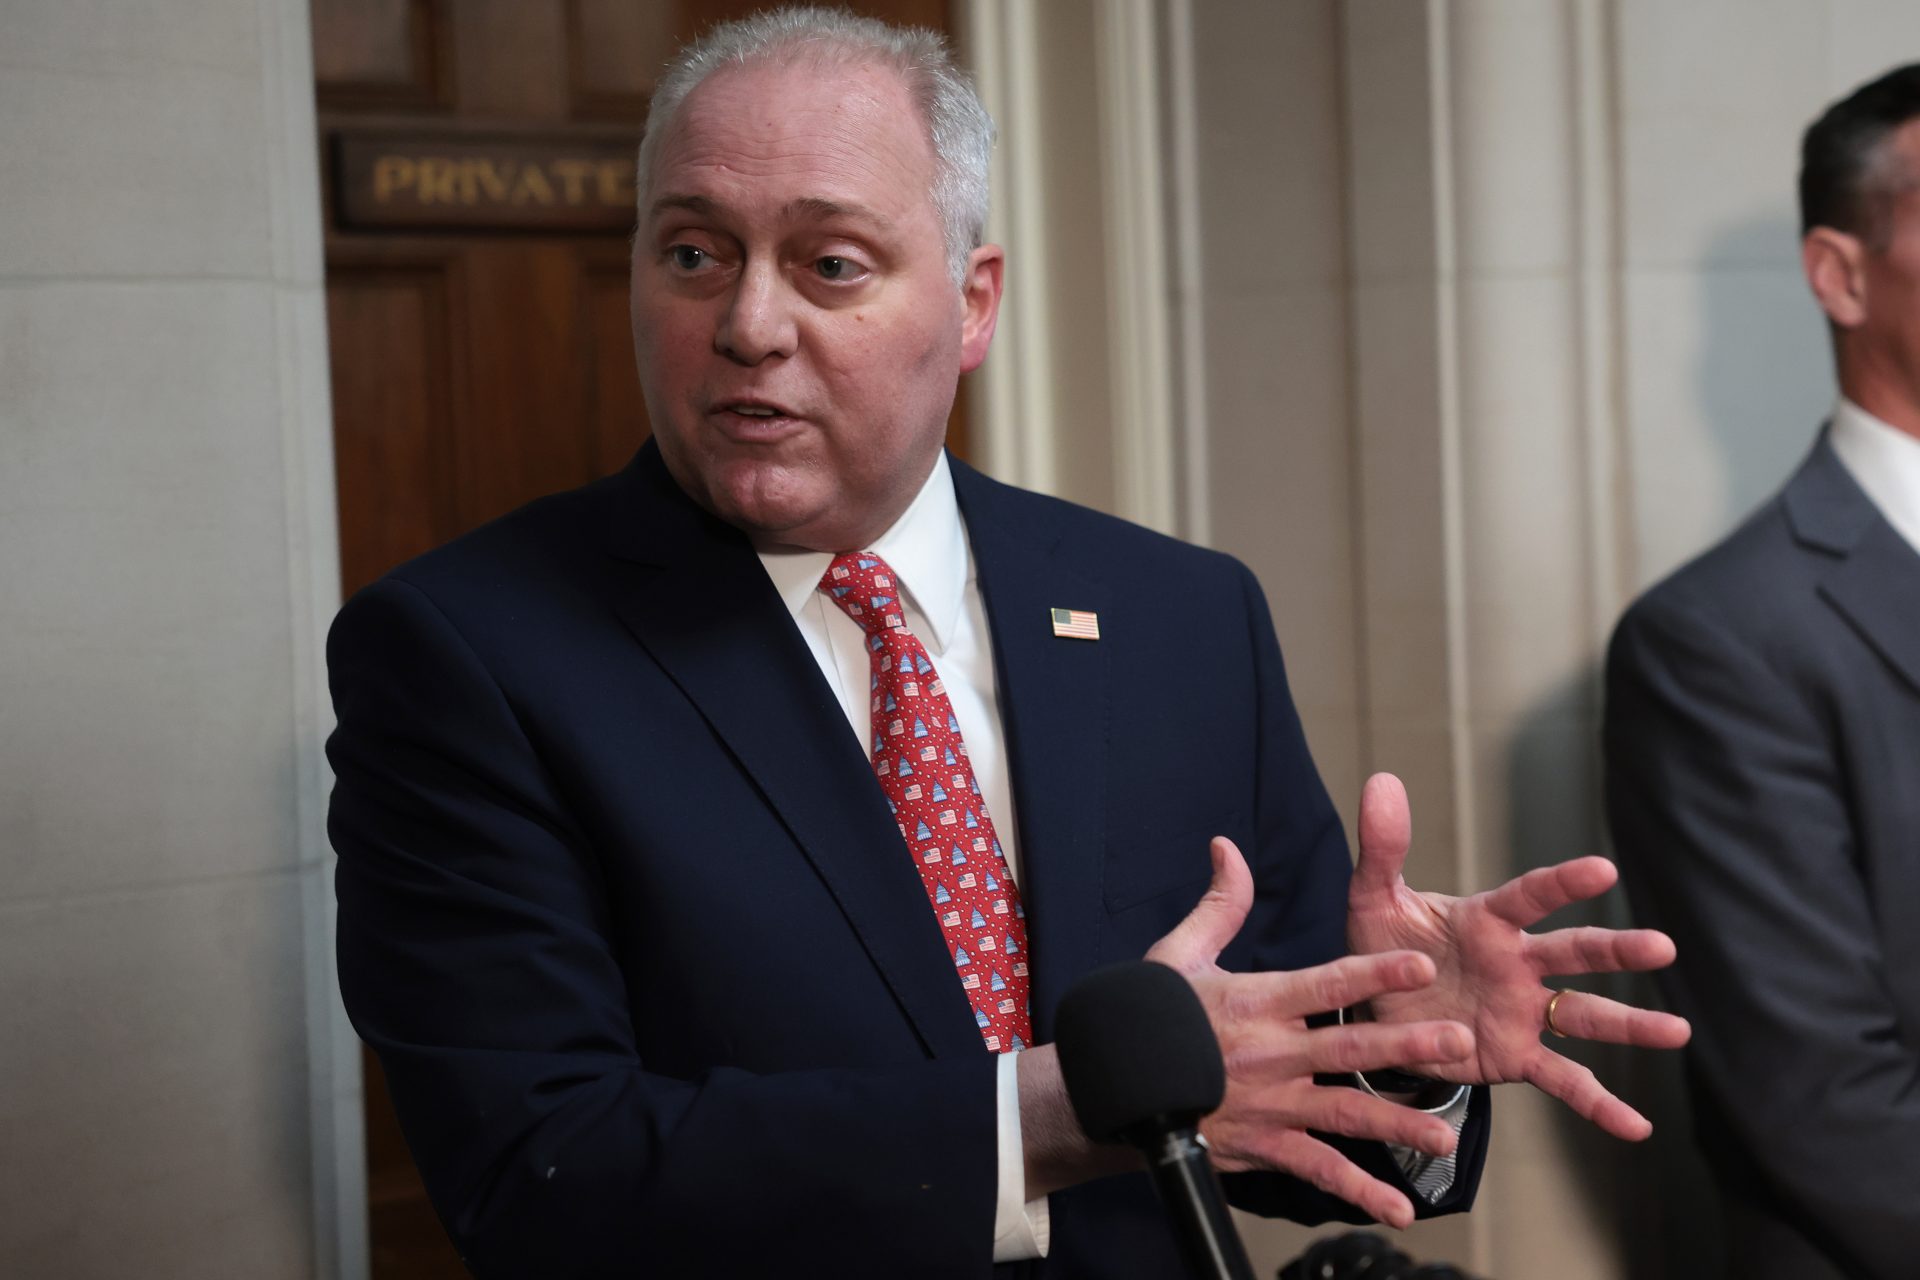 Steve Scalise dropped out of the speakership race